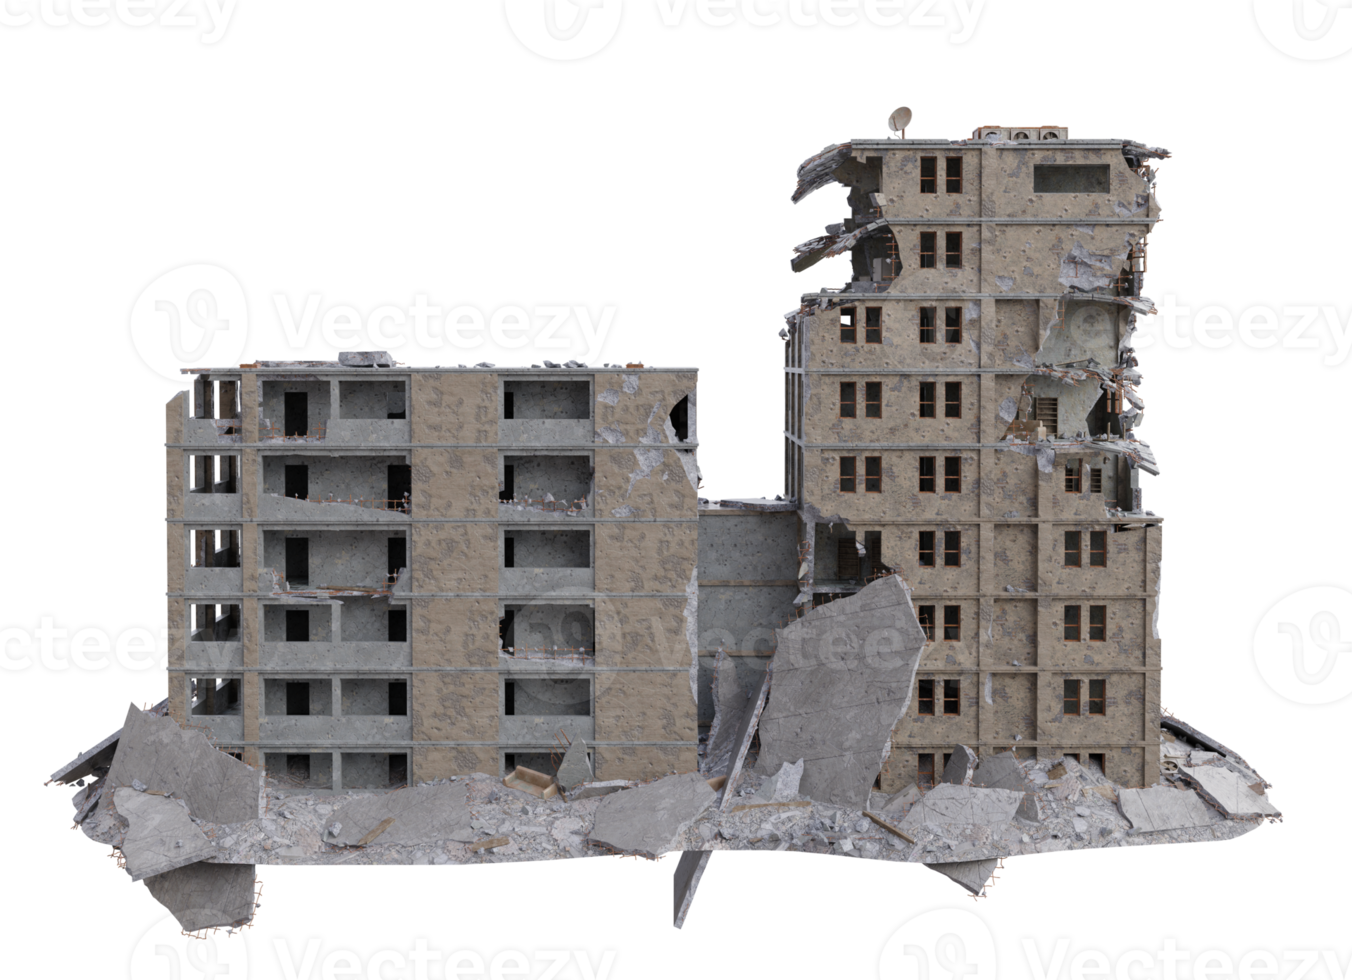 Middle size building damaged after war. 3d render isolated png